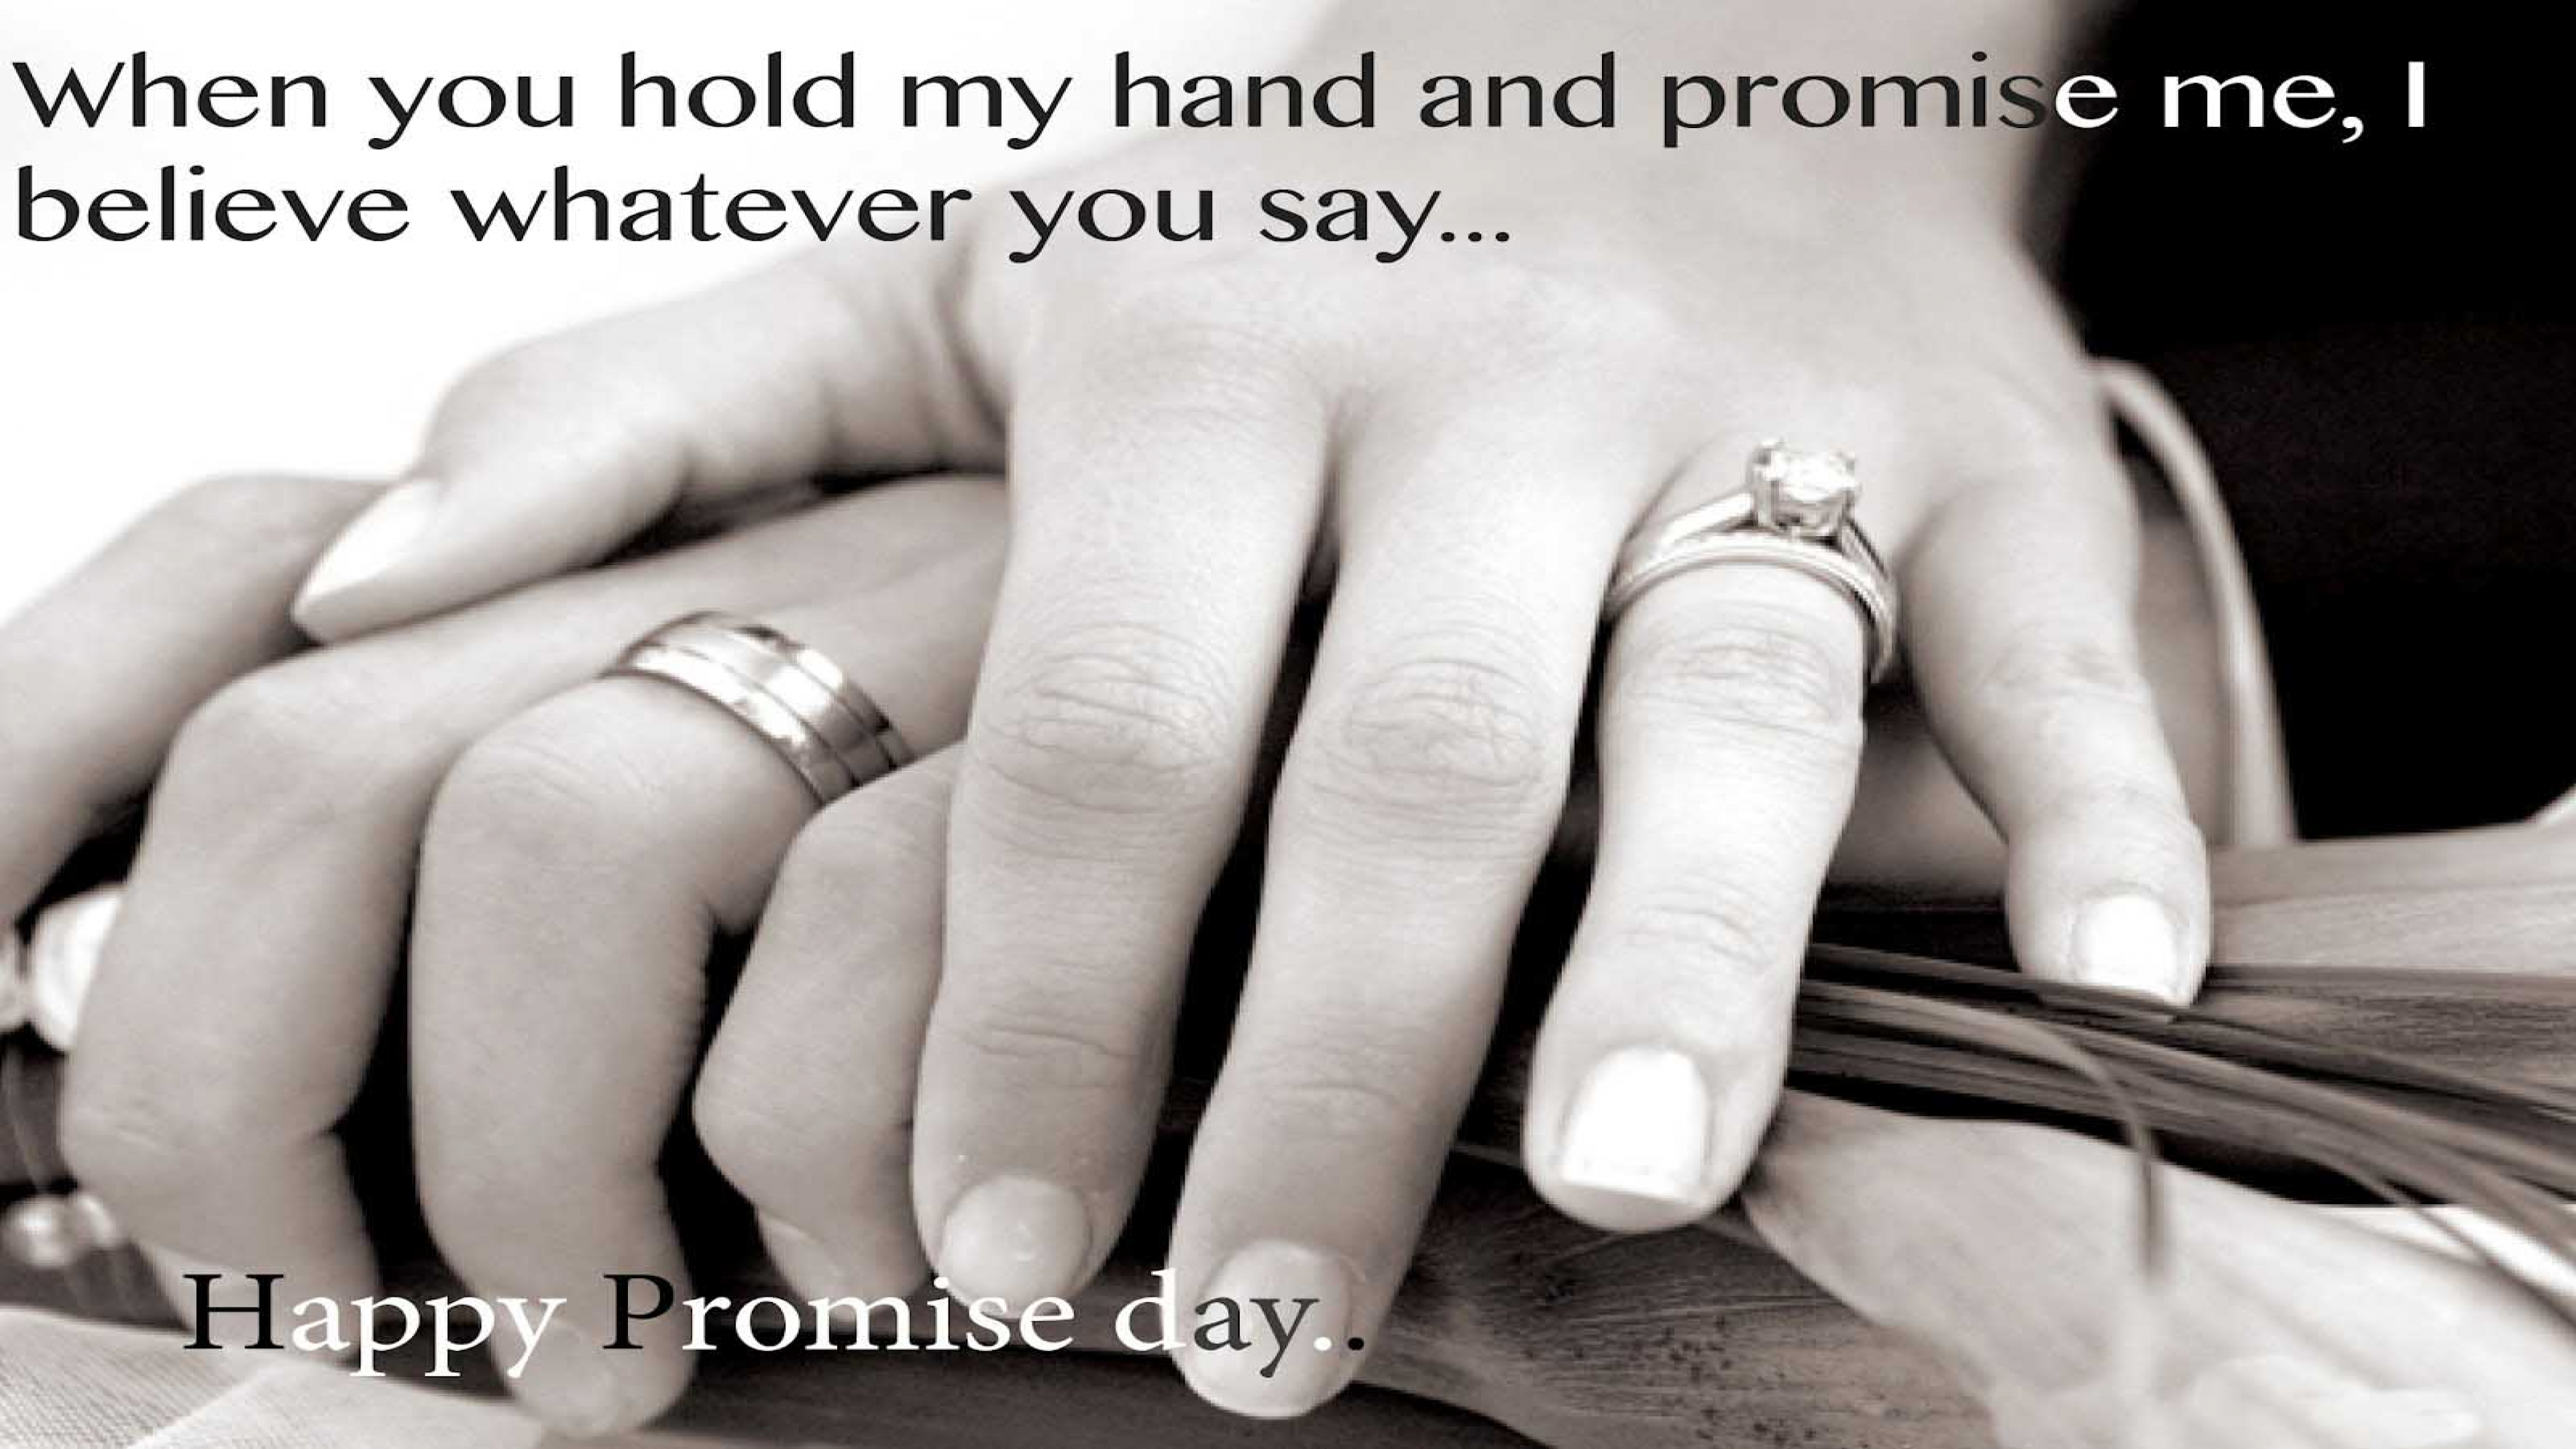 when you hold my hand and promise me, i believe whatever you say happy promise day